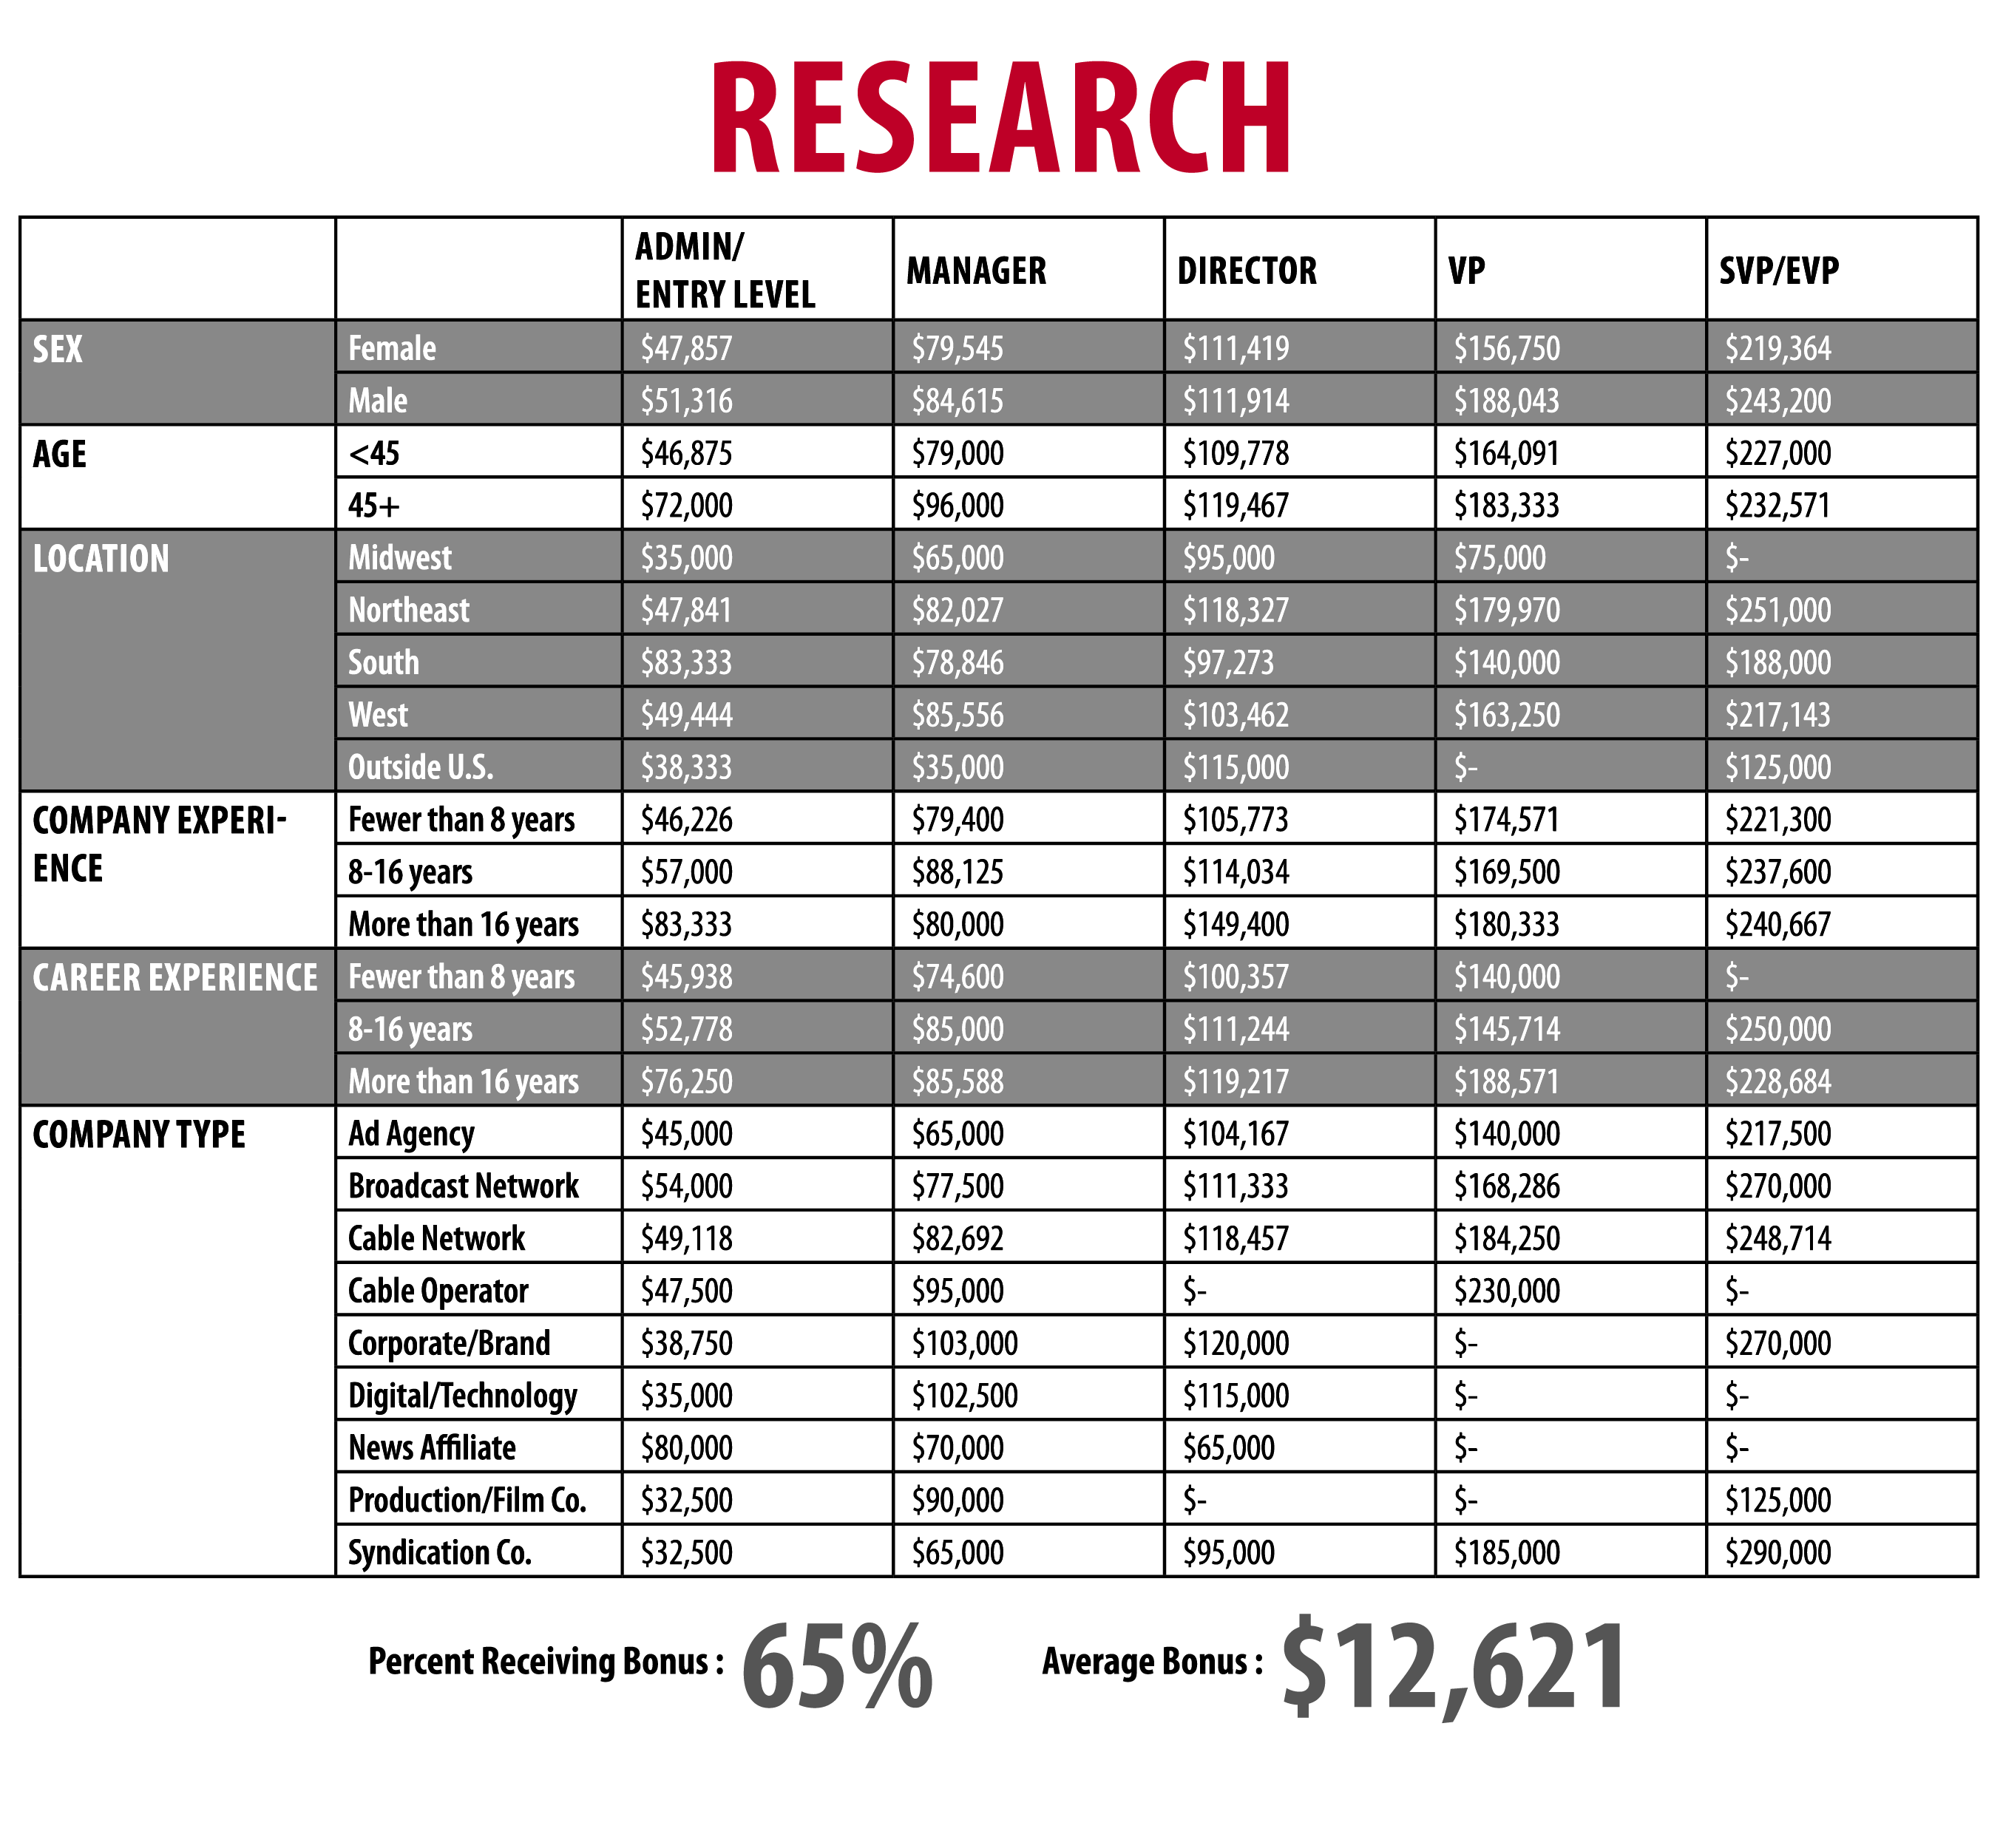 Research_Chart_Outlined